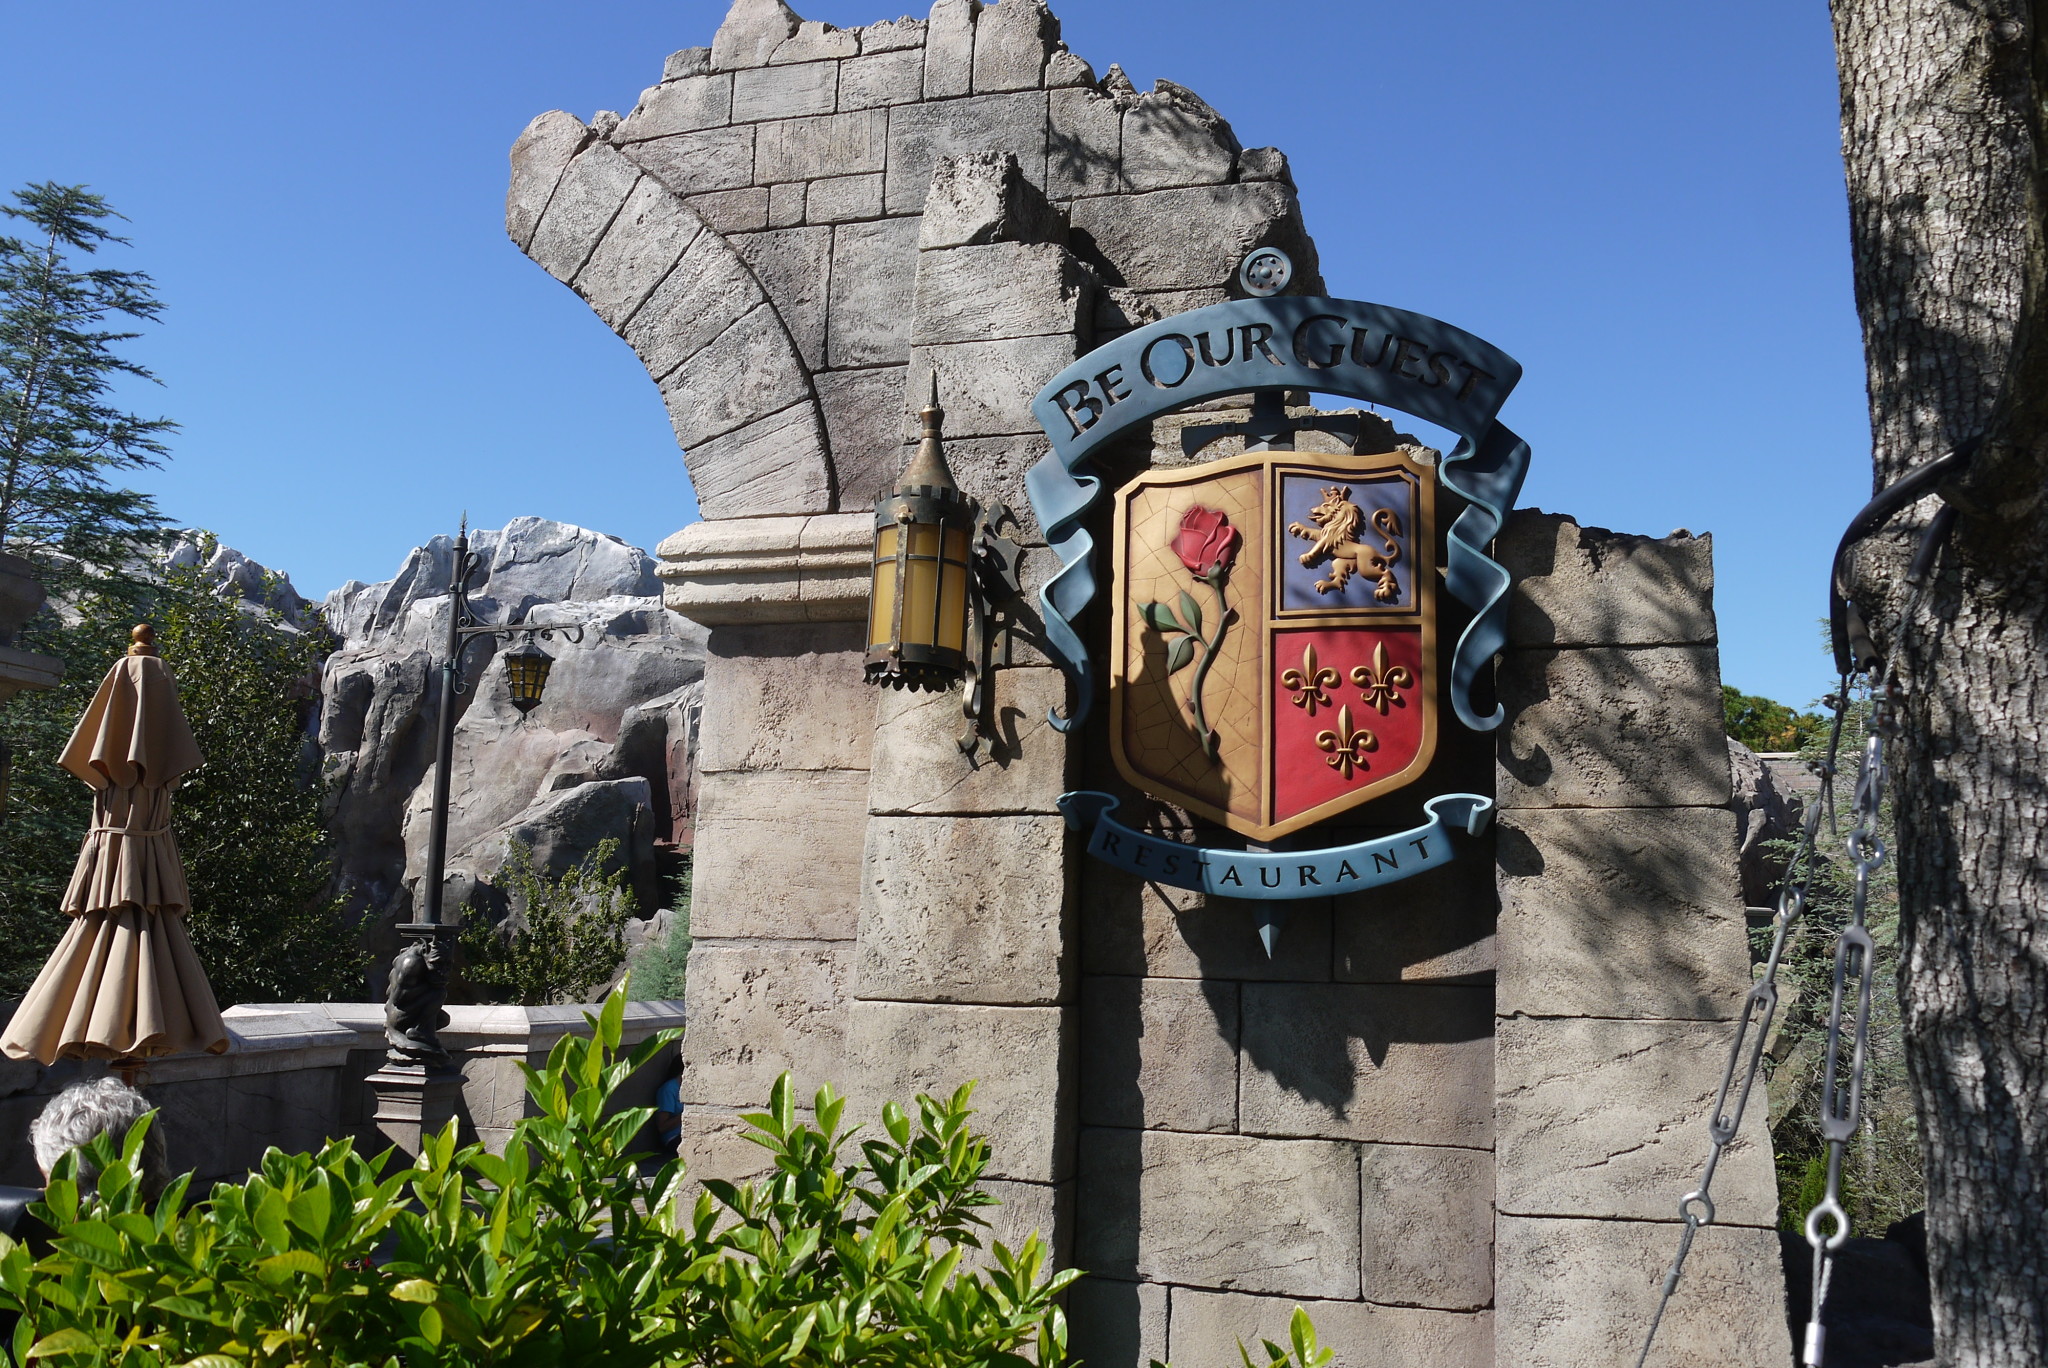 Changes Coming to Be Our Guest at Disney World